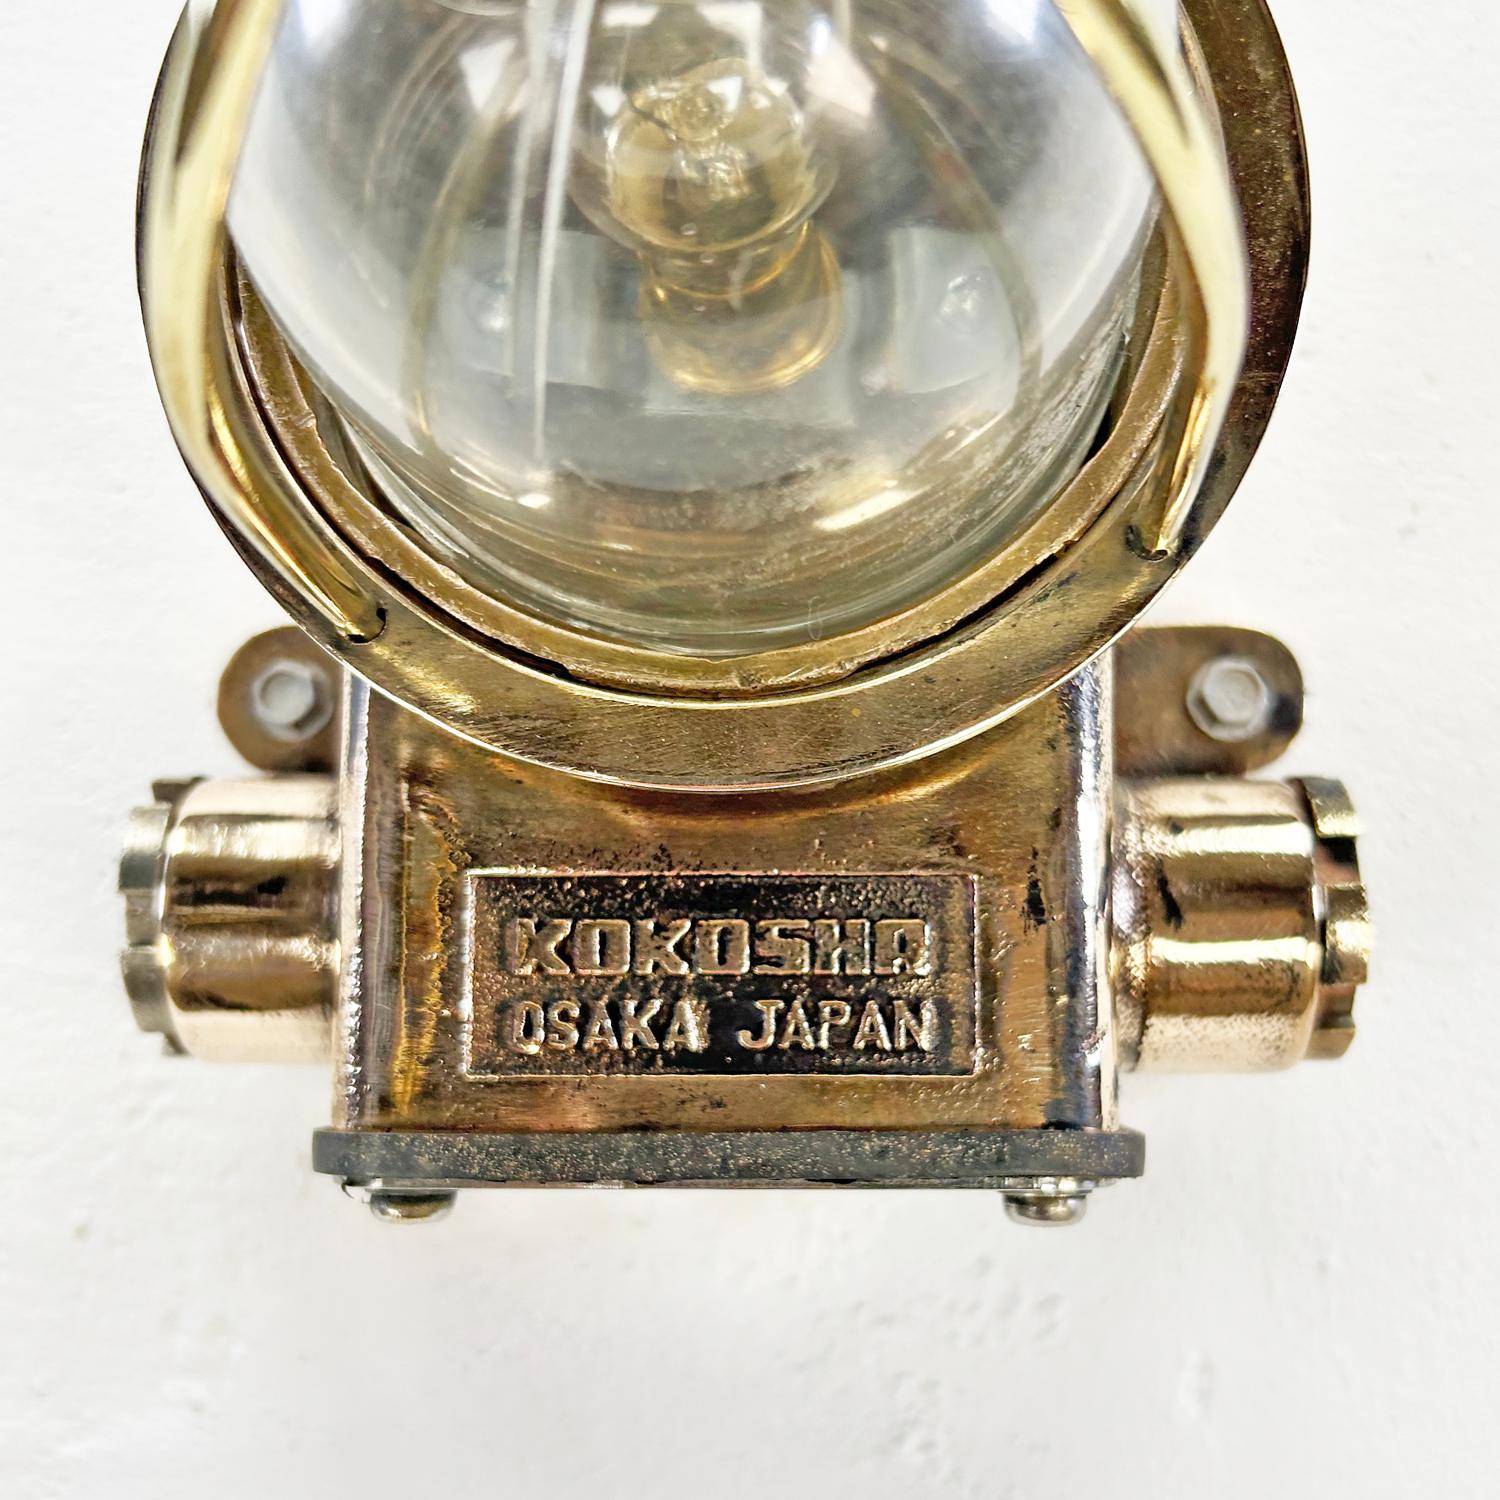 An original solid bronze passageway light by Kokosha of Osaka, Japan.

Made from solid cast bronze with a wire cage and shatter proof acrylic protective dome, this is an extremely robust fixture which was originally used on cargo ships and